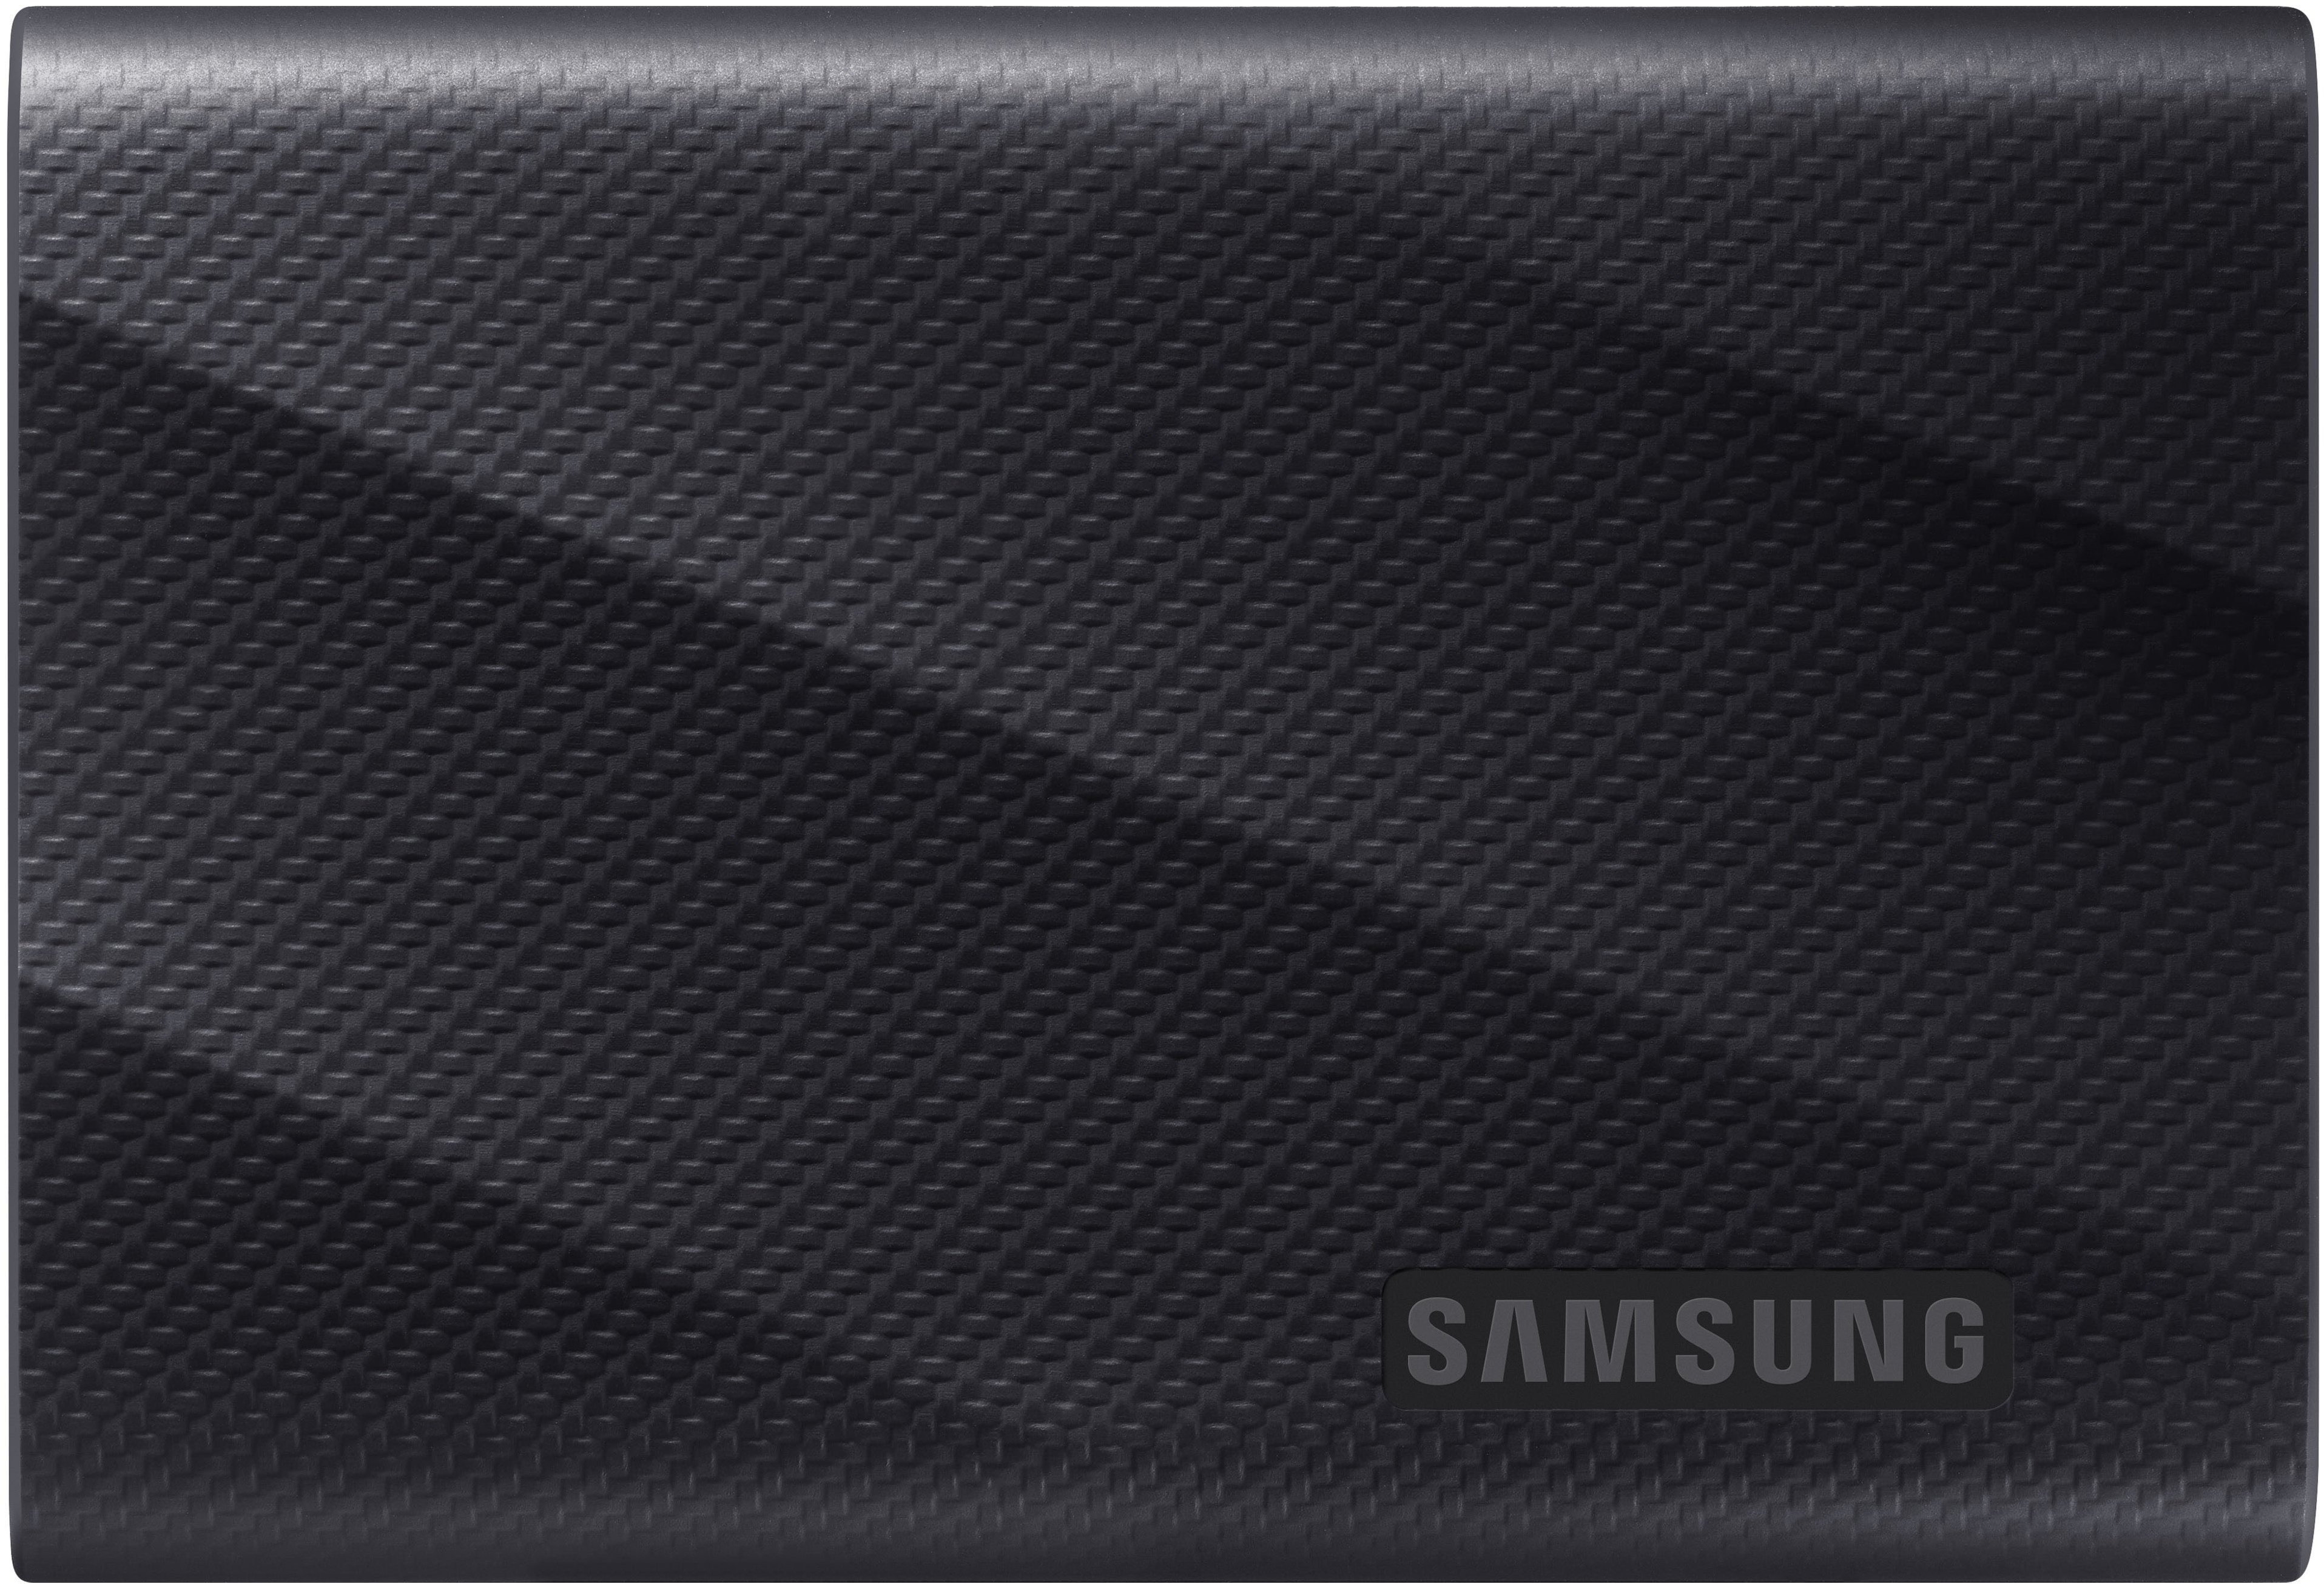 Samsung Portable SSD T9 2TB Review - eTeknix